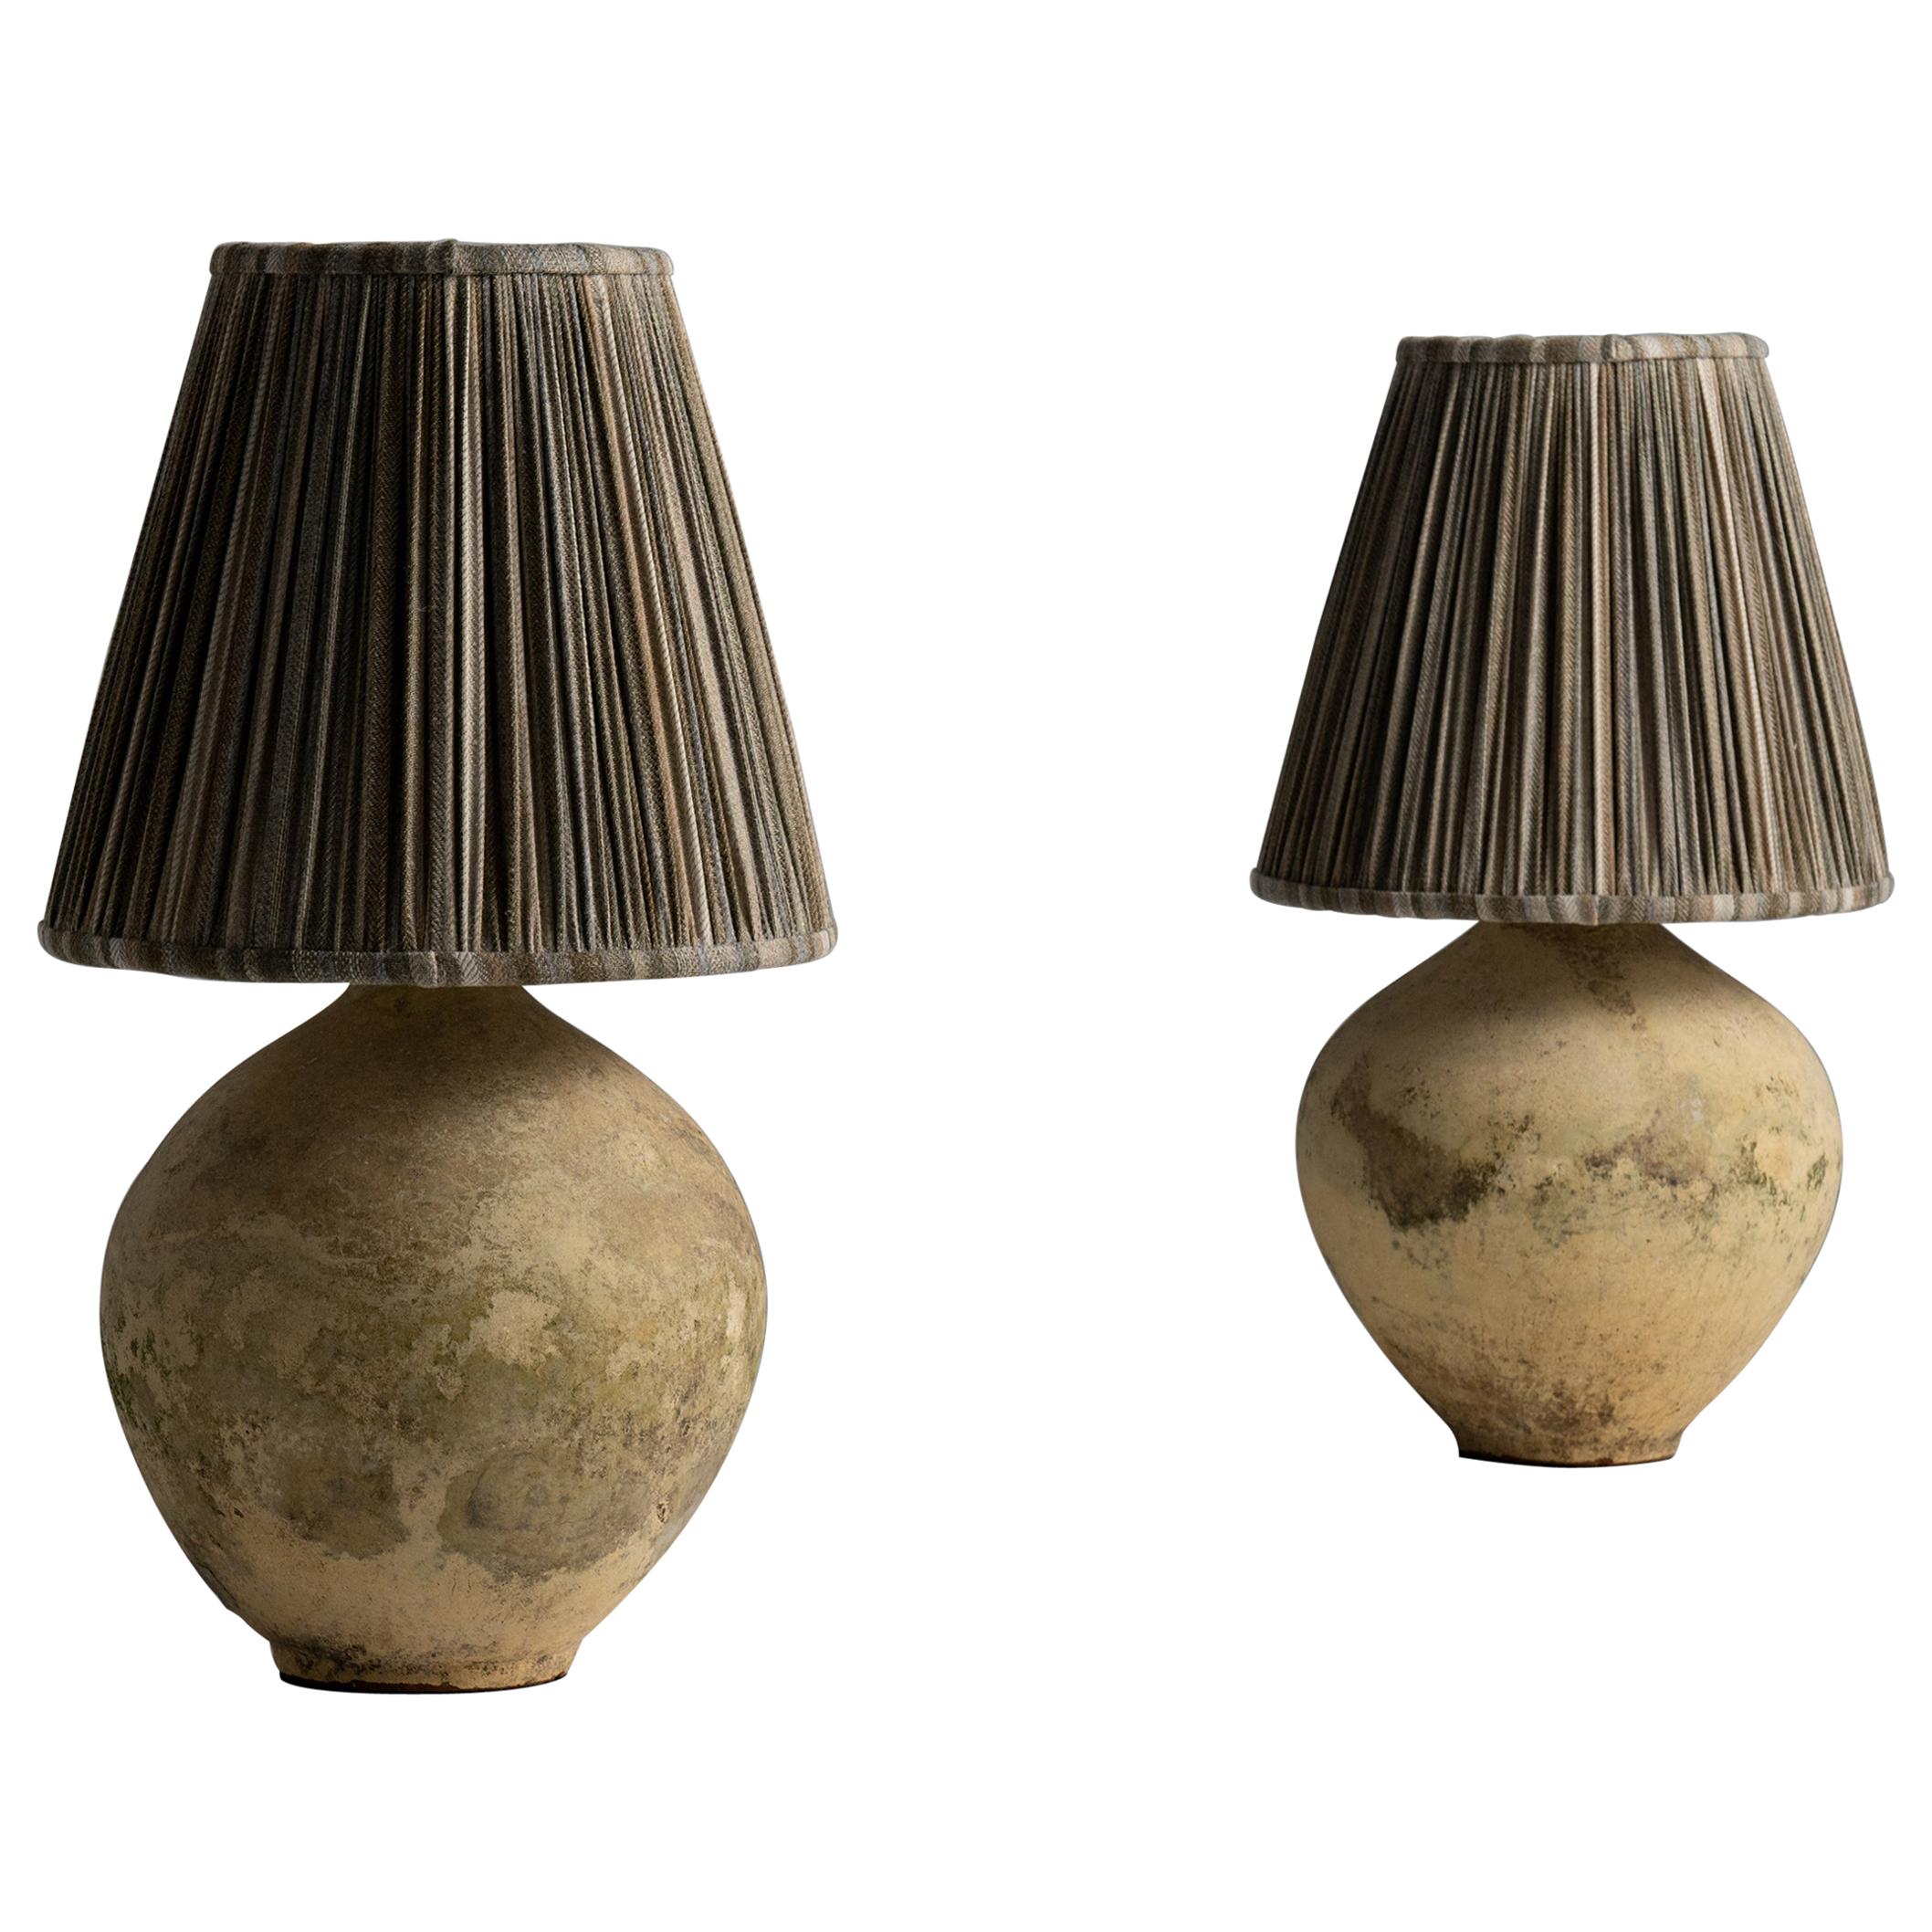 Pair of Terracotta Table Lamps with Wool Stripe Gathered Shades